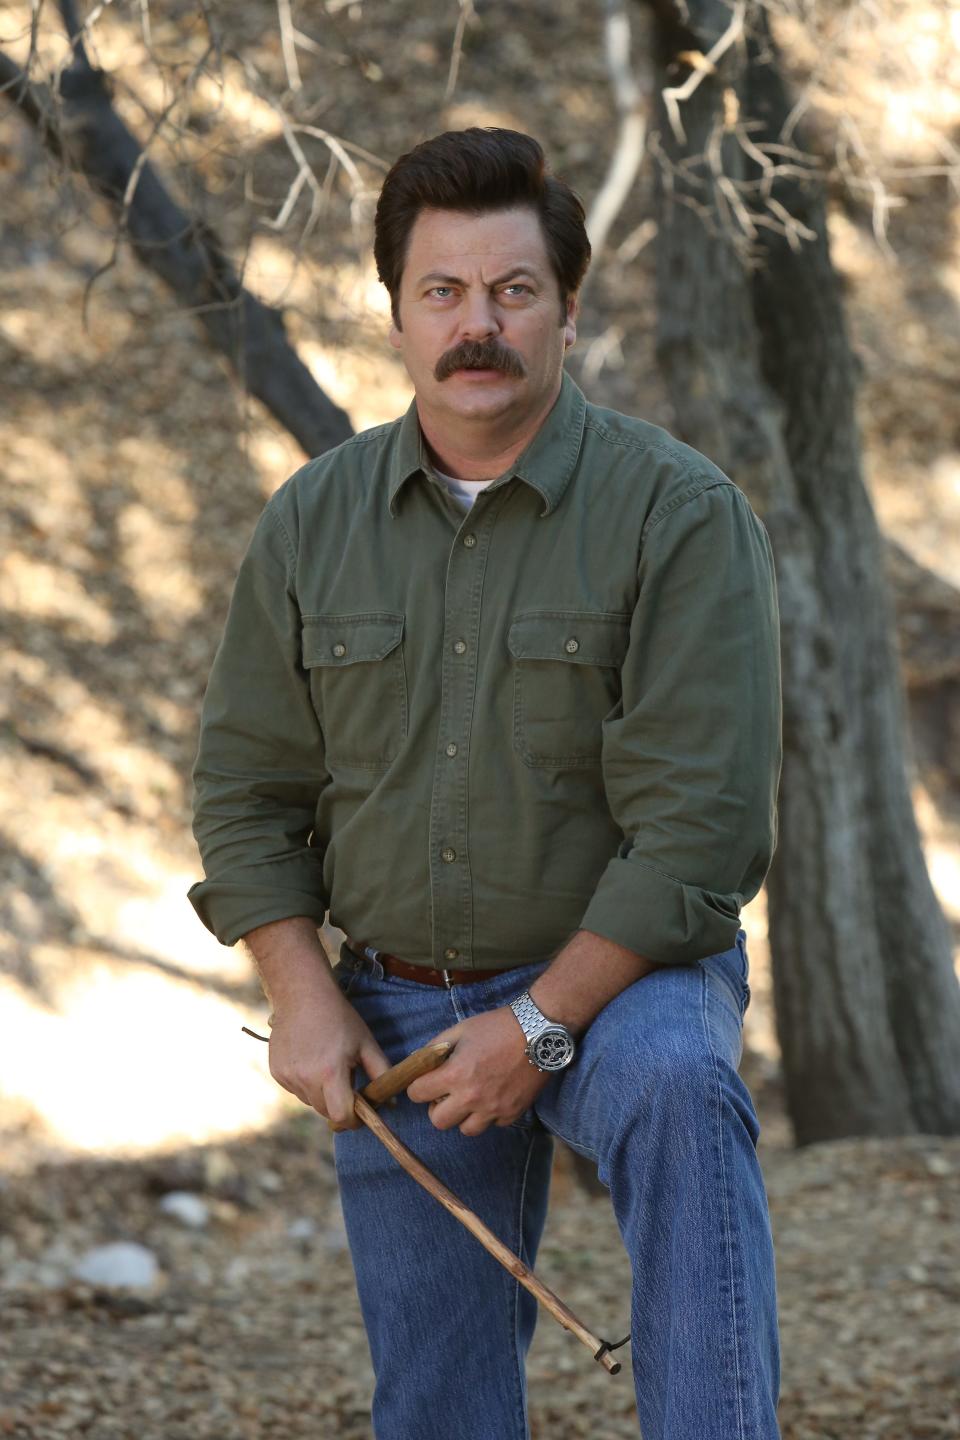 Author and actor Nick Offerman is best known for playing Ron Swanson on TV's u0022Parks and Recreation.u0022 He also performs comedy on stage and is a skilled woodworker.